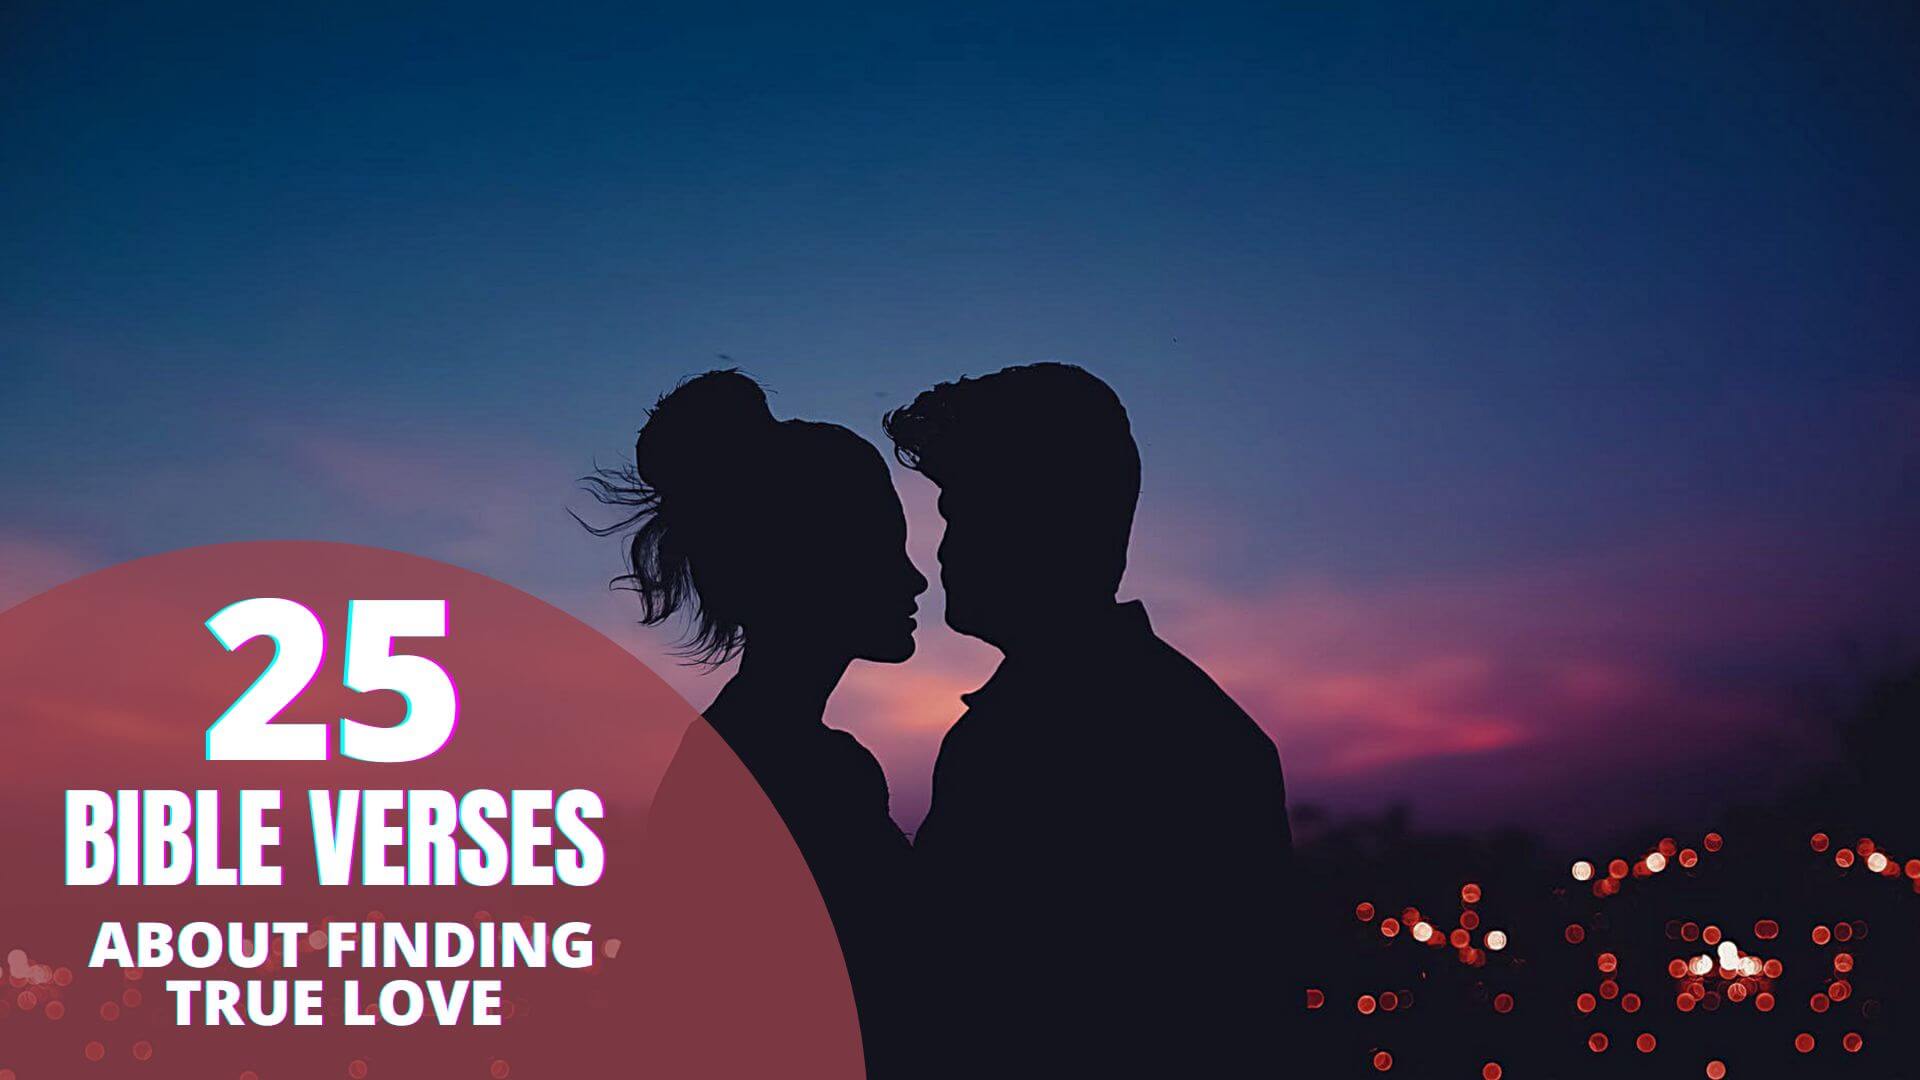 25 Bible Verses About Finding True Love